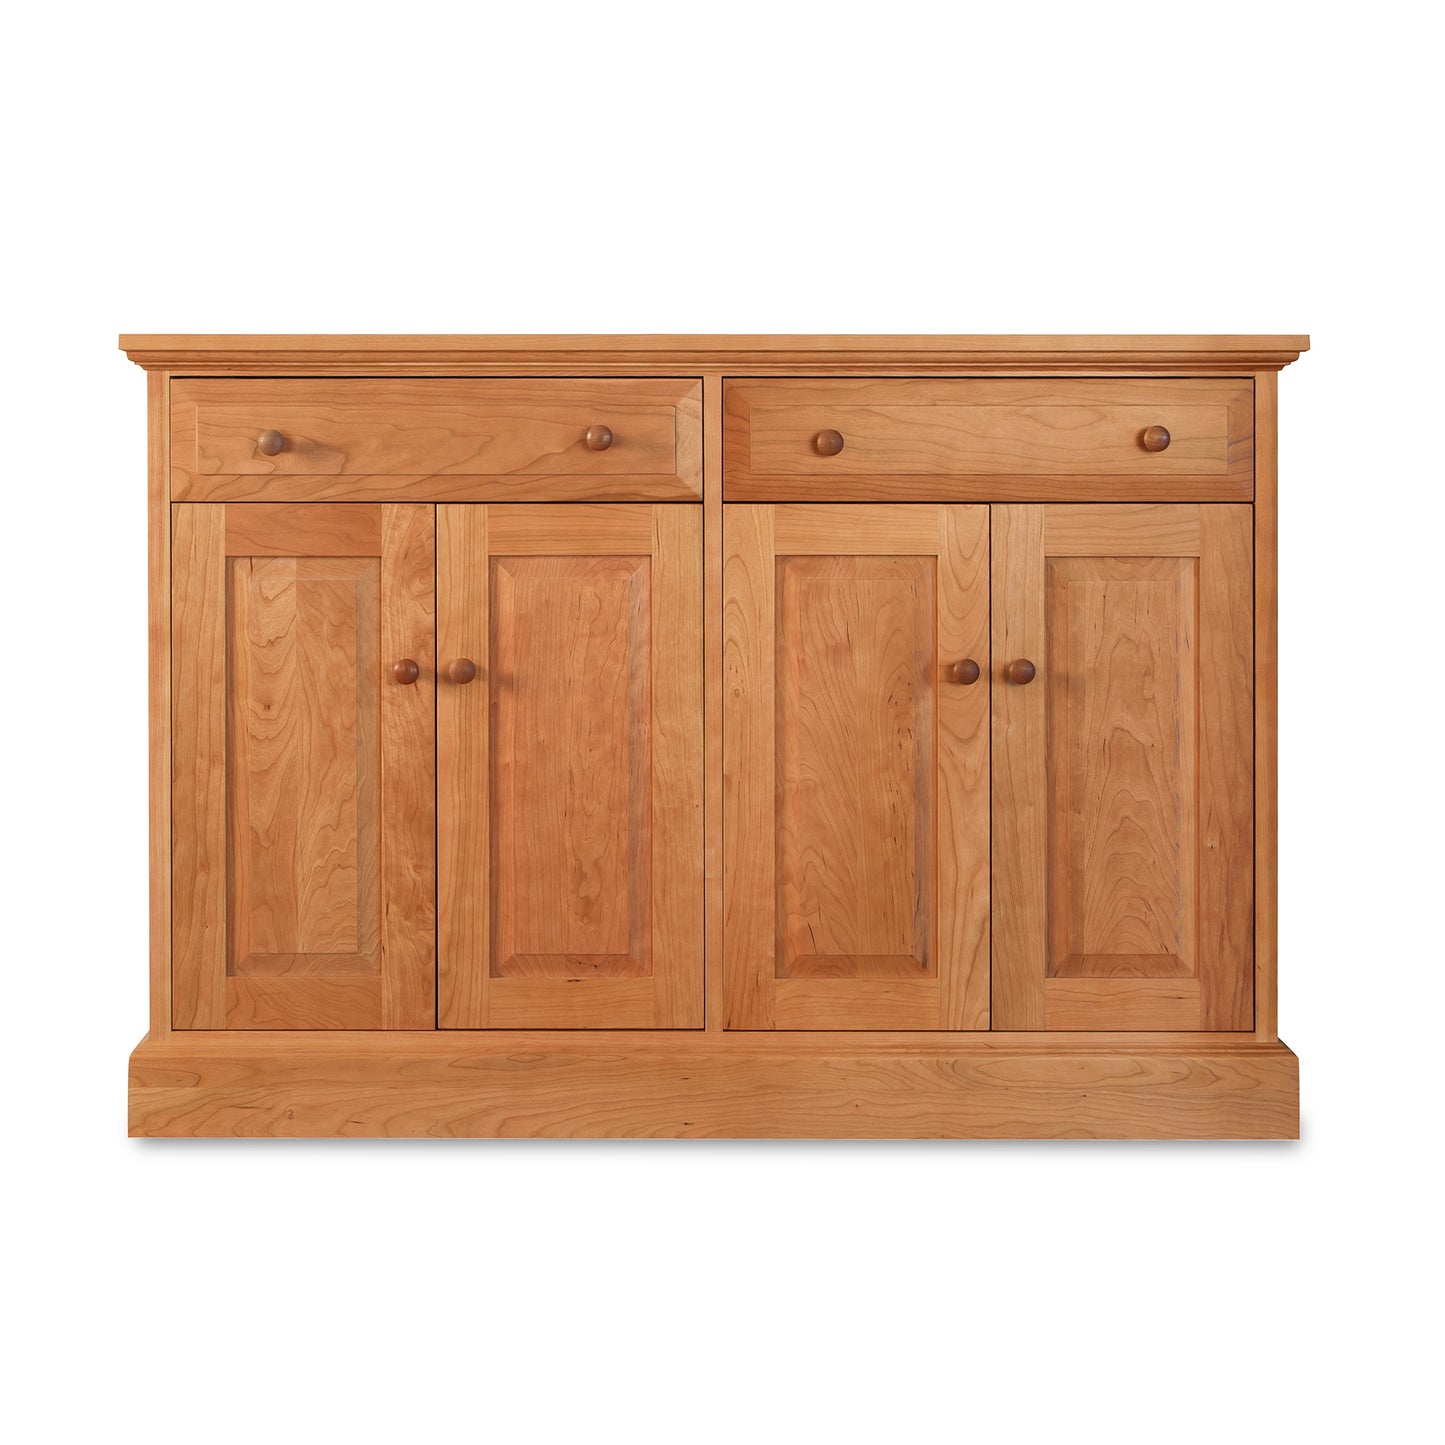 A New England Shaker Buffet made by Lyndon Furniture, featuring two doors and two drawers, providing ample dining room storage.